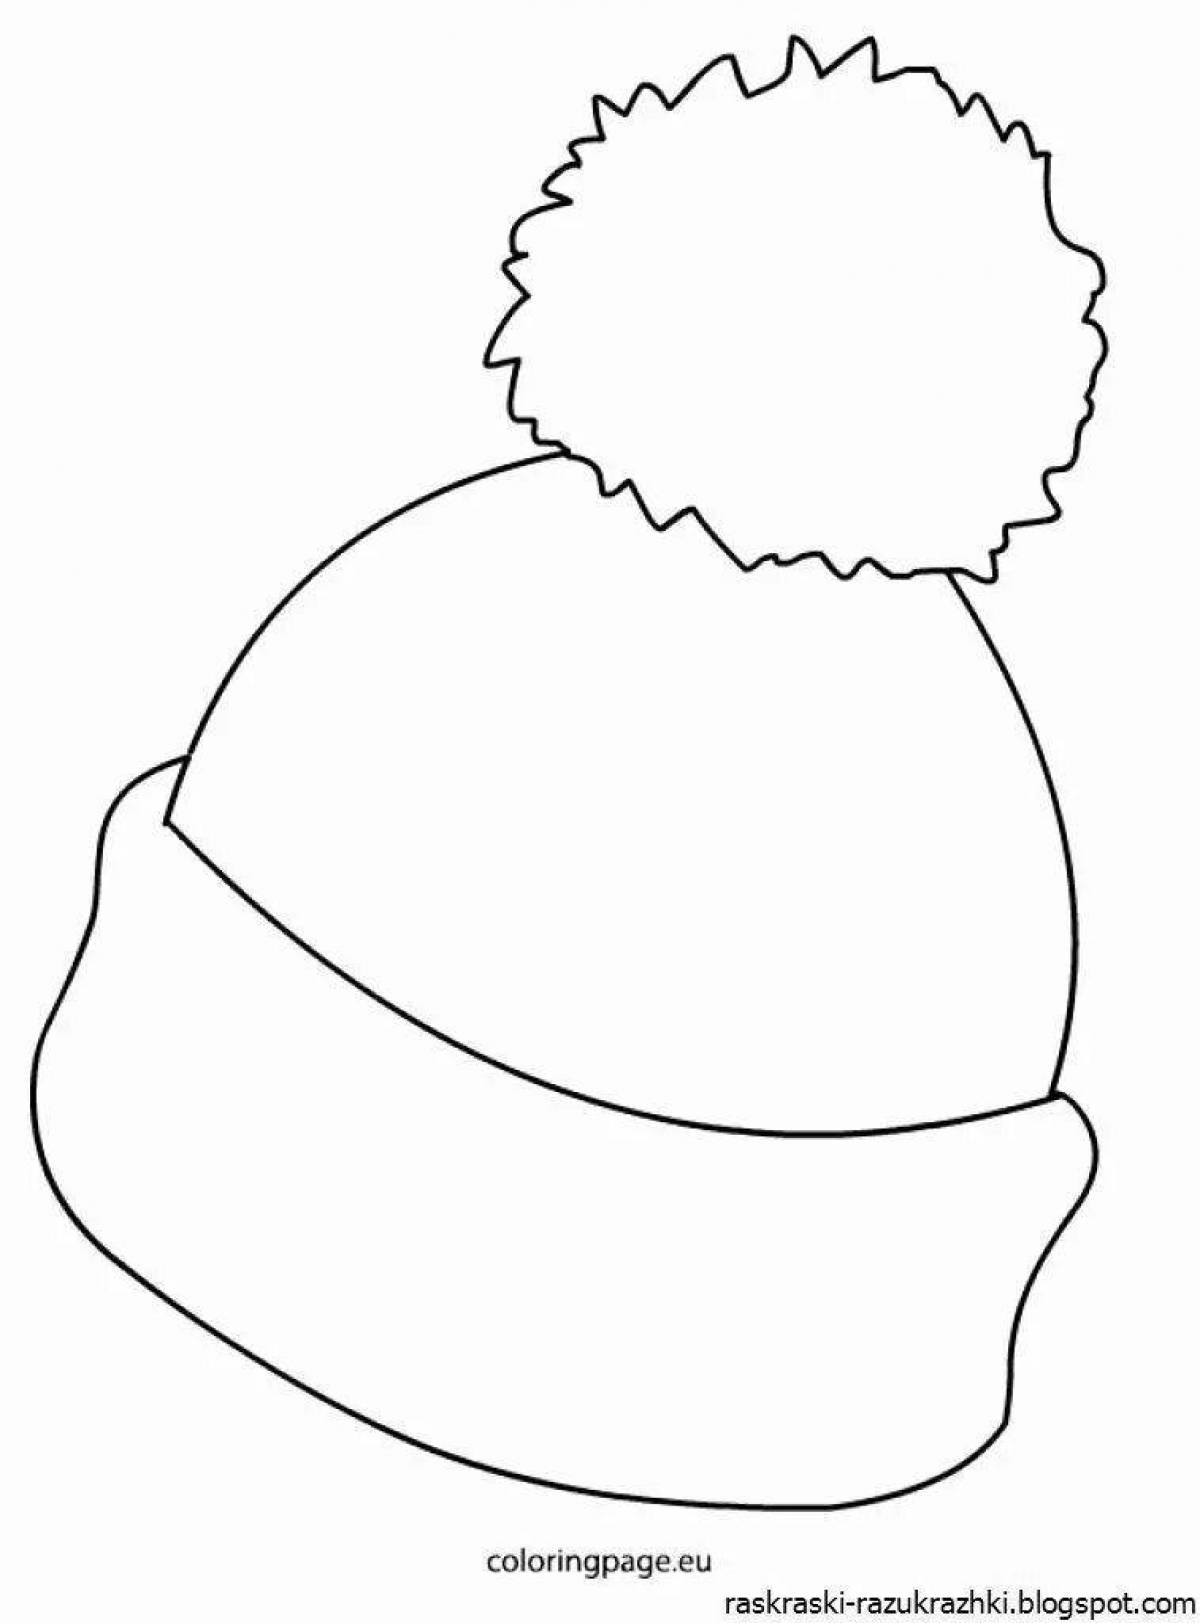 Color-frenzy hat coloring page for children 2-3 years old